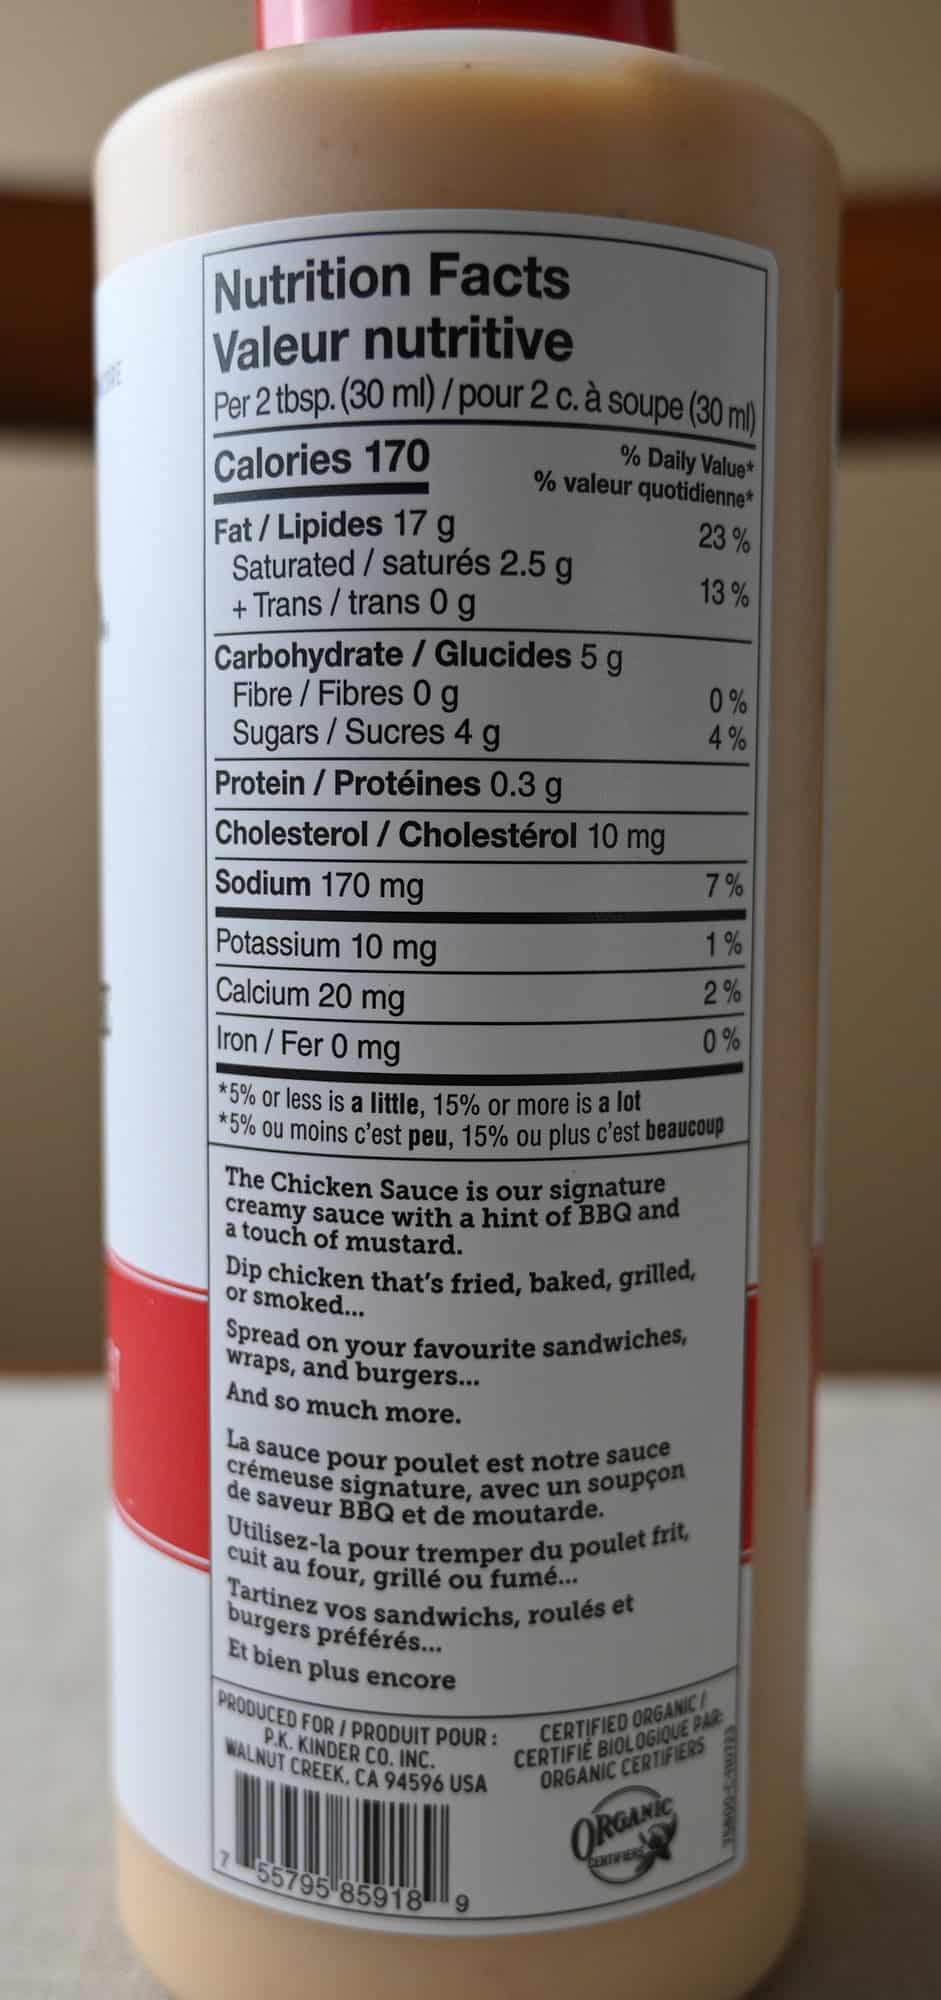 Image of the back of the sauce container showing nutrition facts and ways to use the dip.